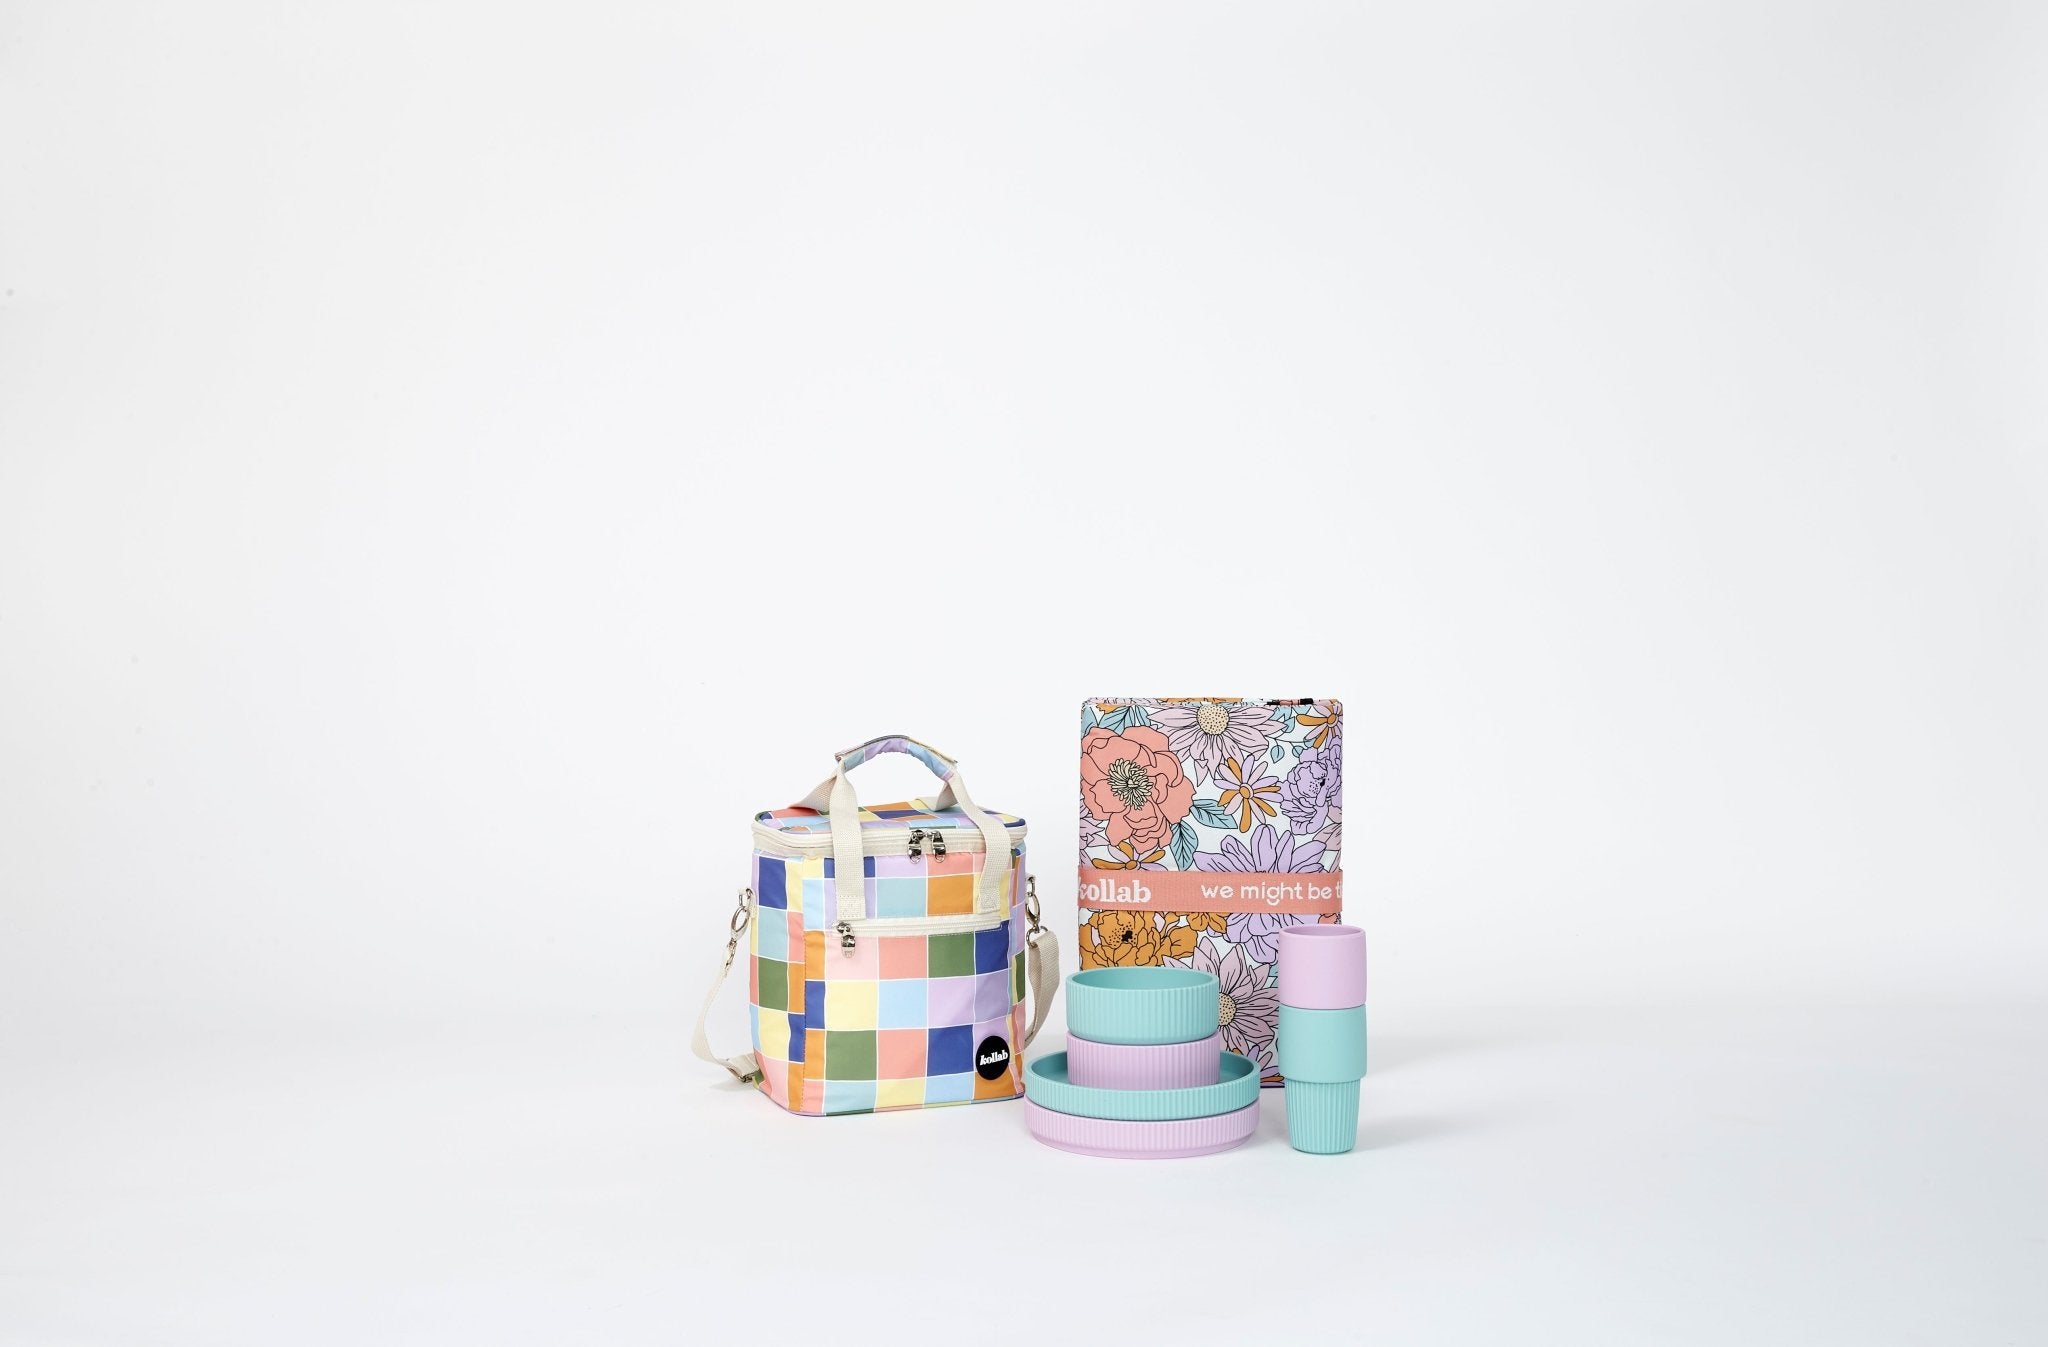 We Might Be Tiny x Kollab Mini Cooler - Checkers